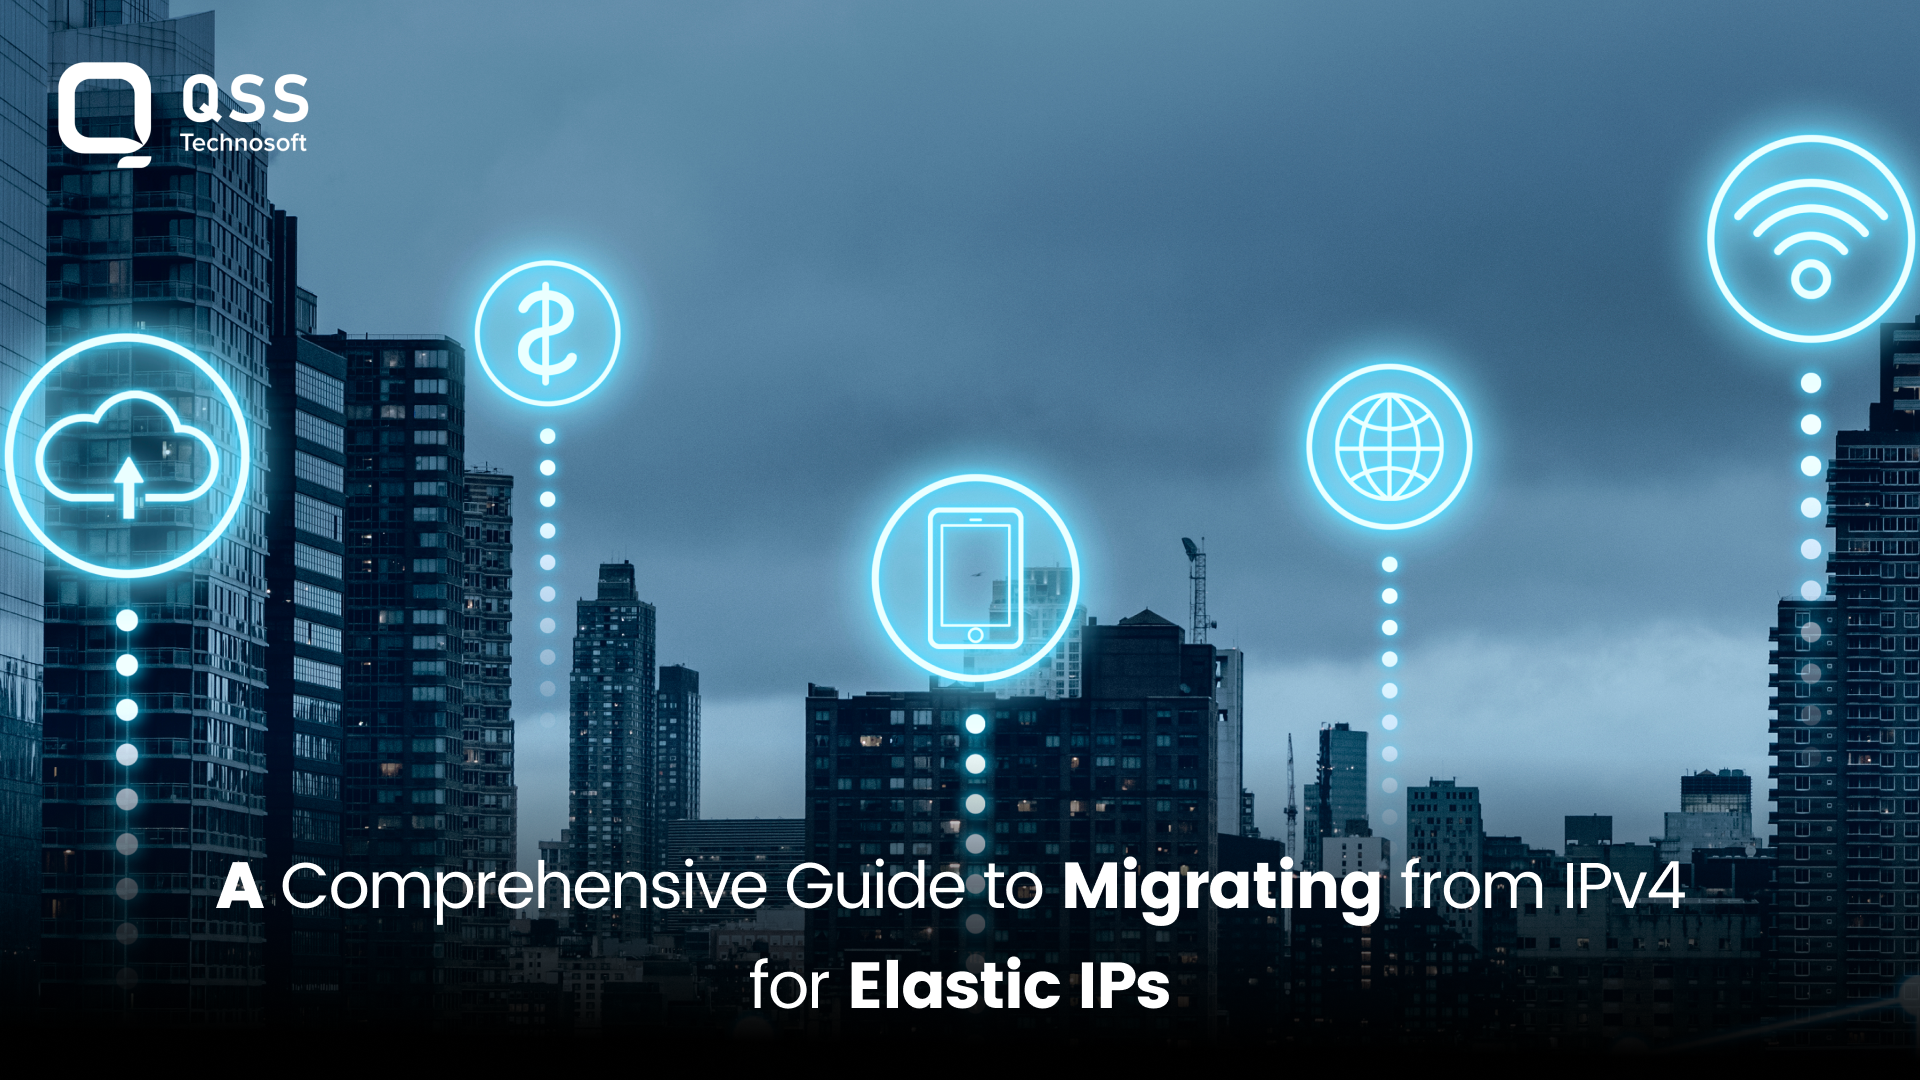 Cutting AWS Costs with IPv6: A Comprehensive Guide to Migrating from IPv4 to IPv6 for Elastic IPs